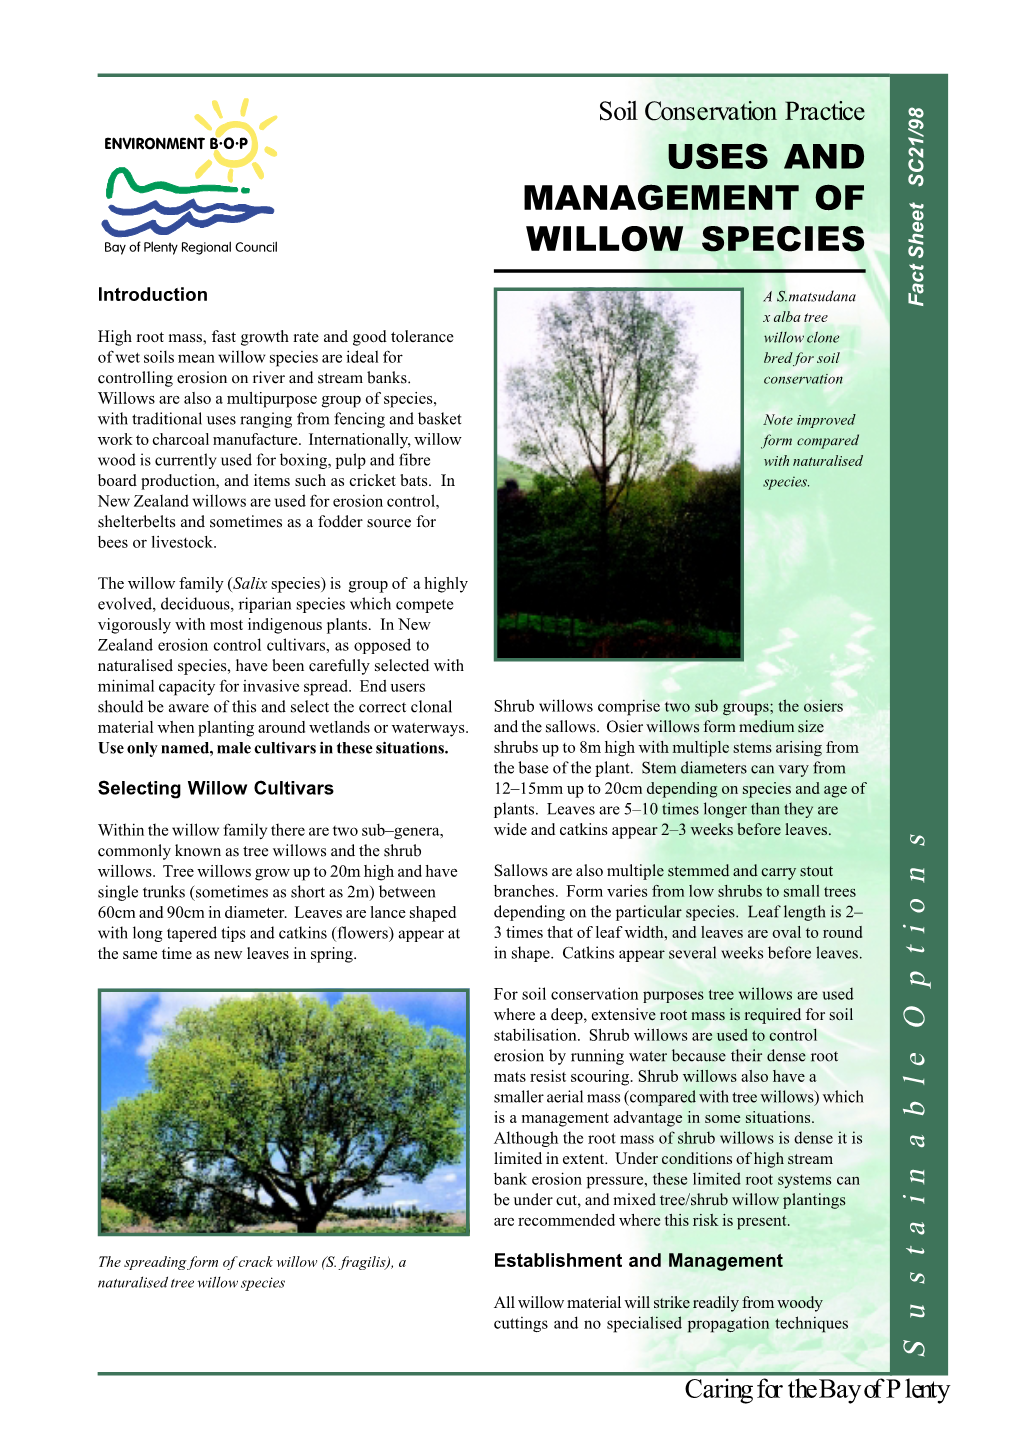 Uses and Management of Willow Species